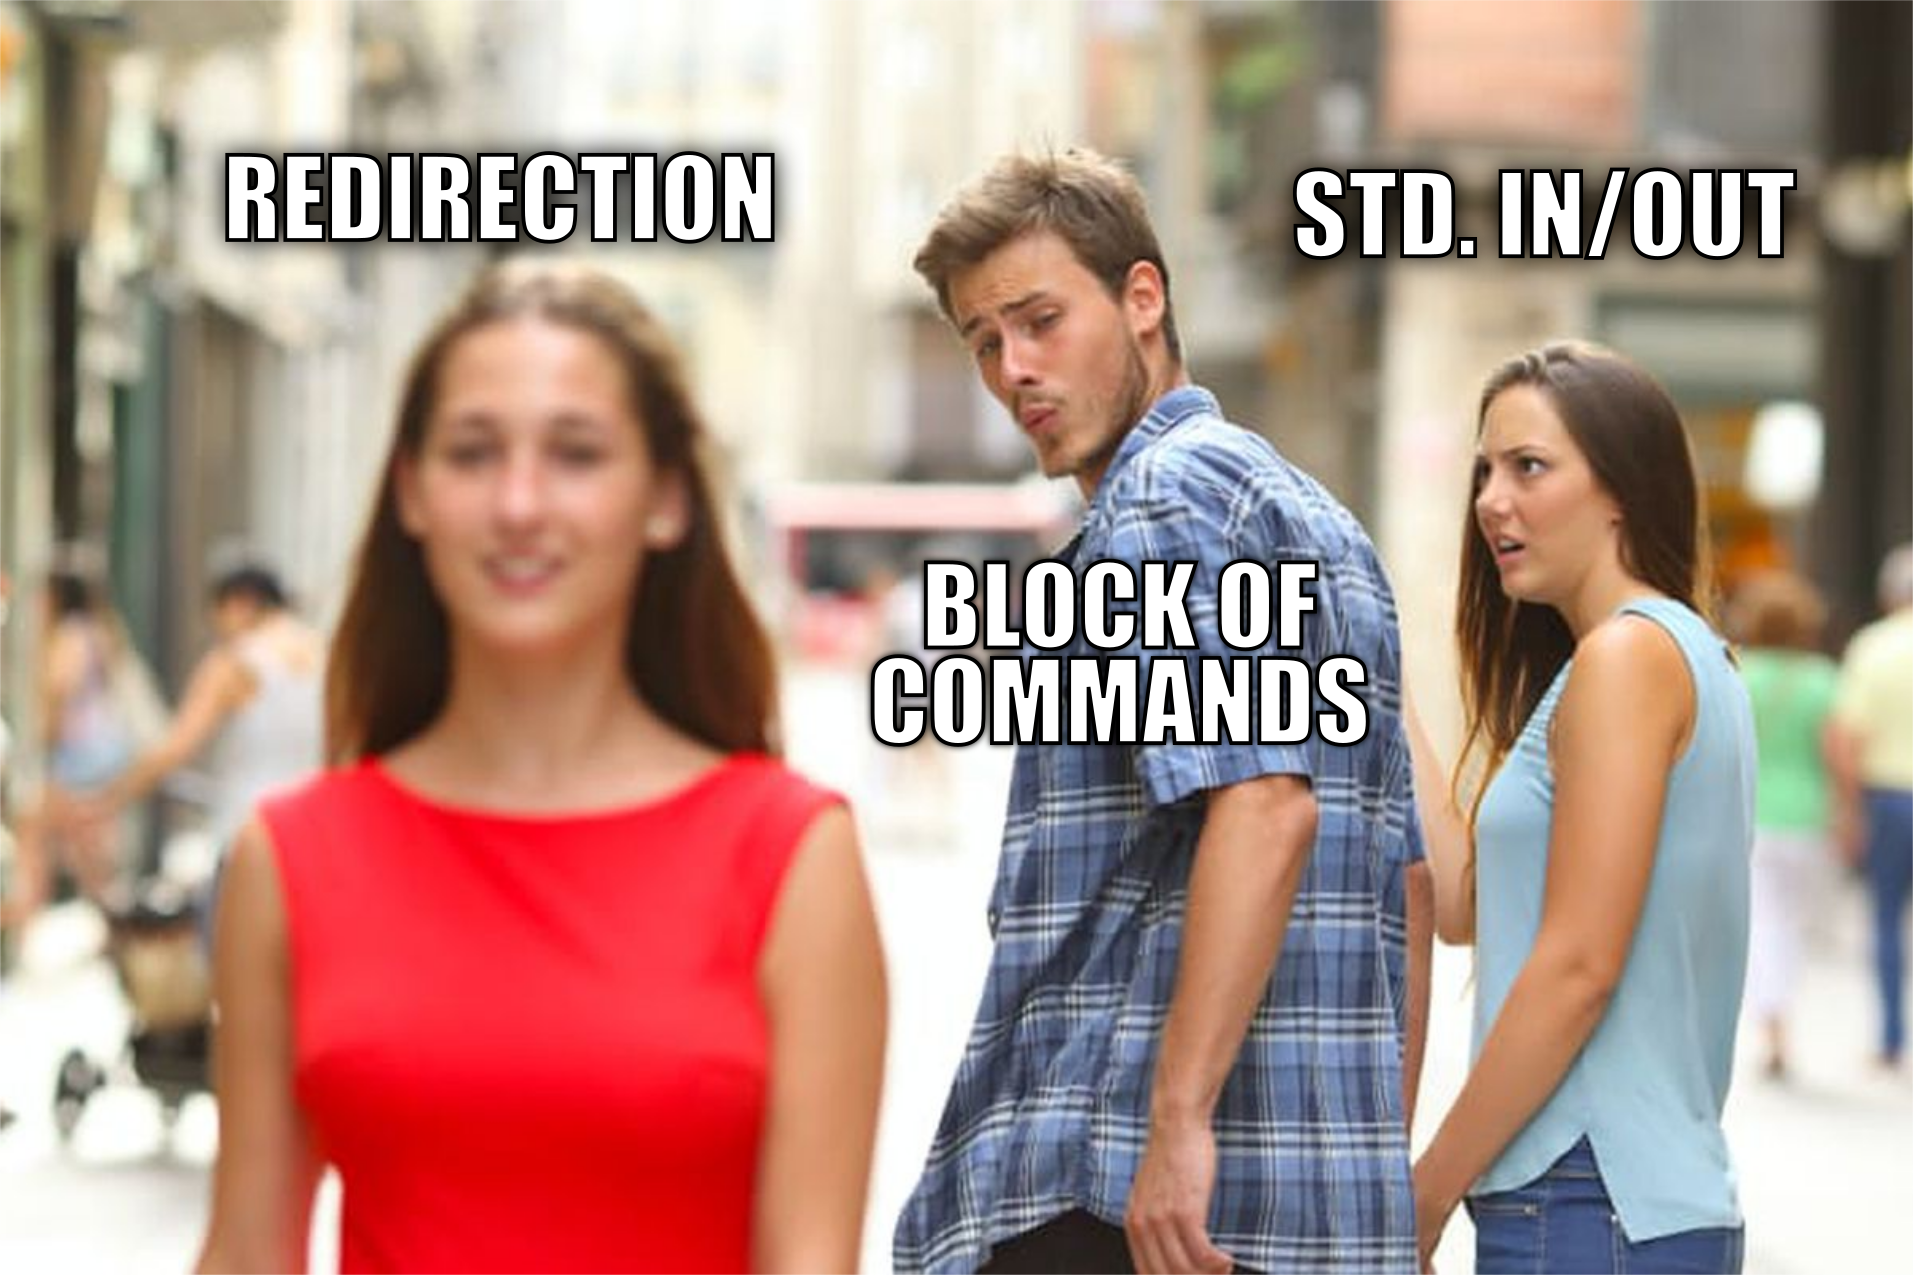 Redirection of block of commands.